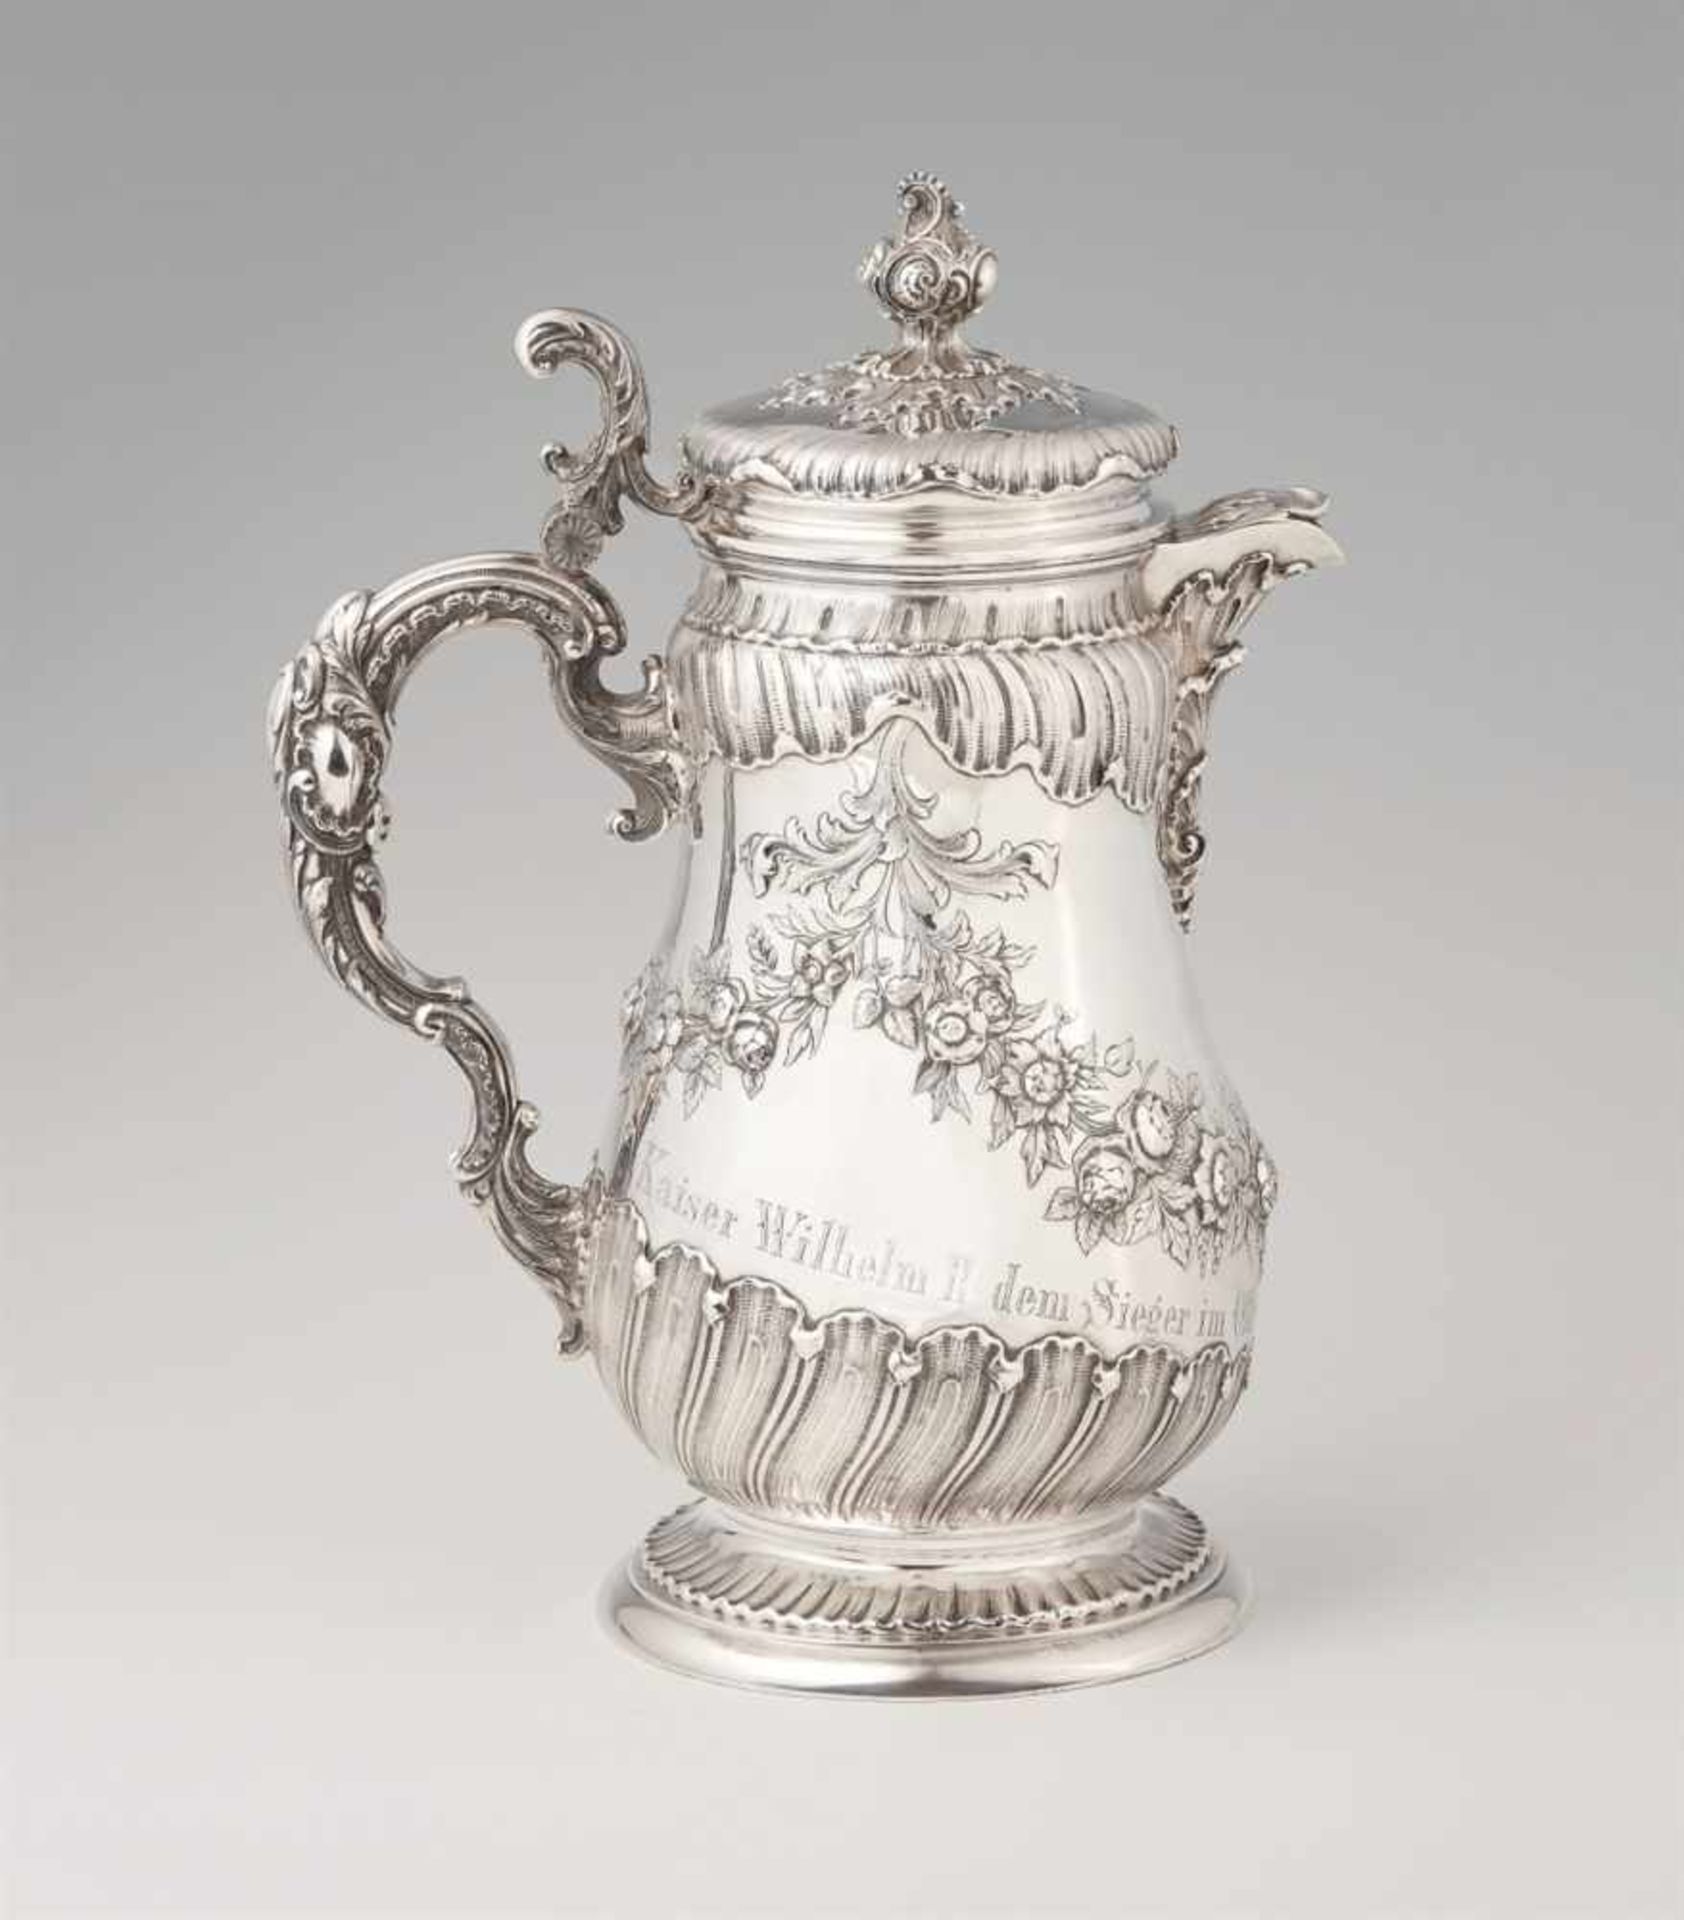 A Berlin silver horse racing trophyA large pear-form pitcher with slip lid, engraved "Kaiser Wilhelm - Bild 8 aus 11